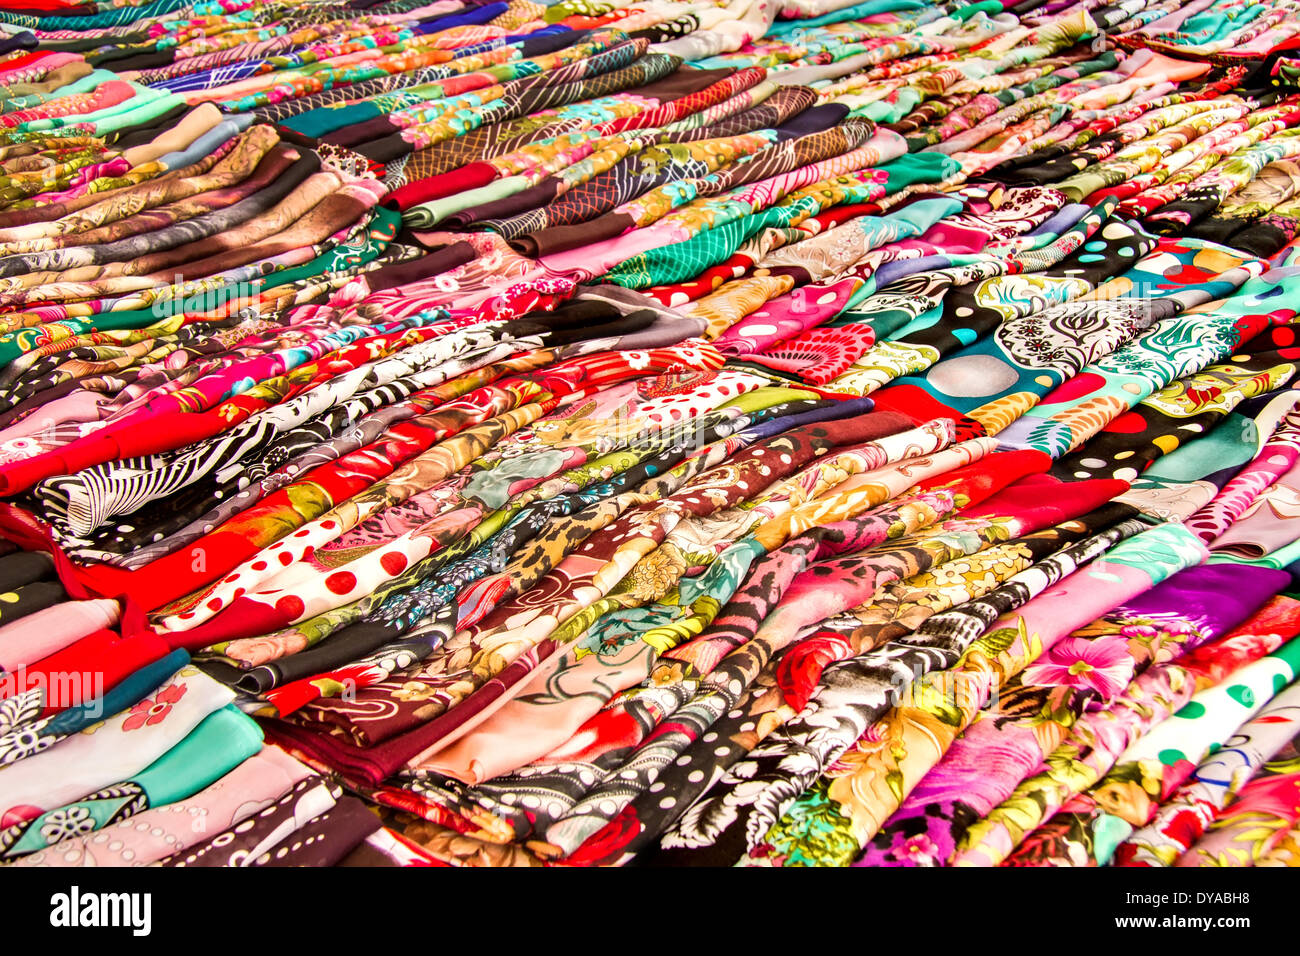 Rows Of Colorful Head Scarfs At A Street Market Stock Photo